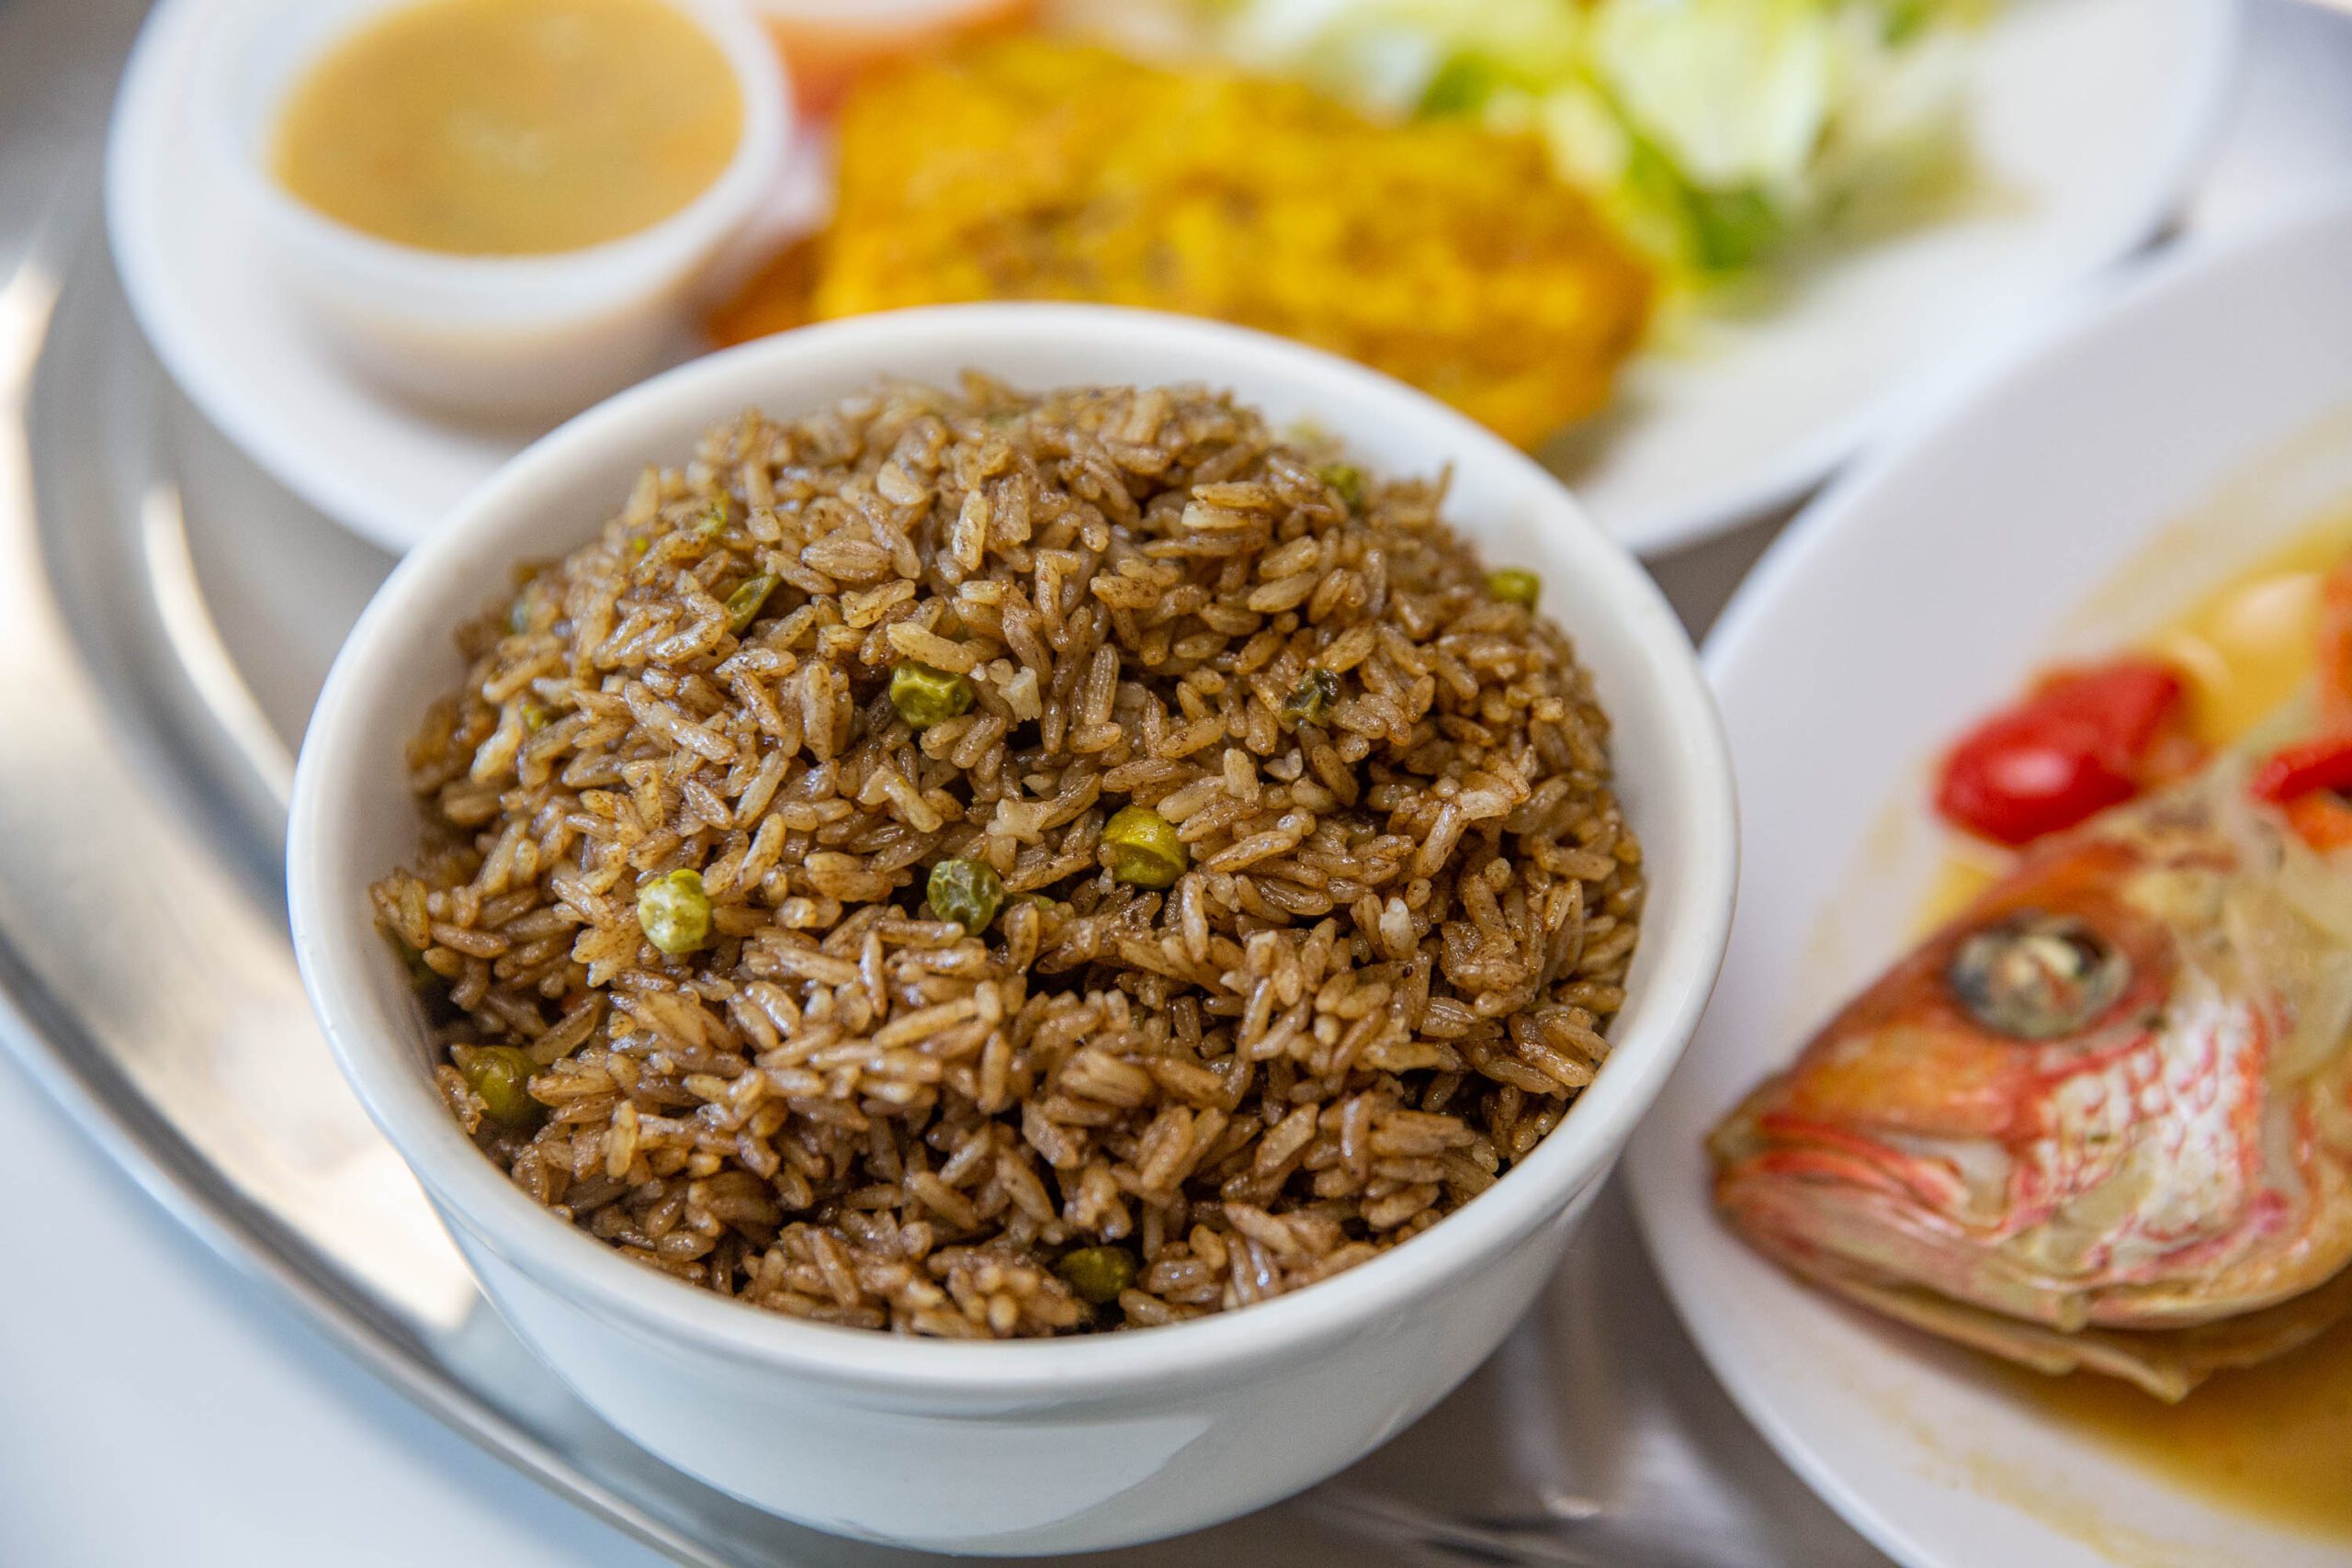 a white bowl filled with rice next to a plate of food.